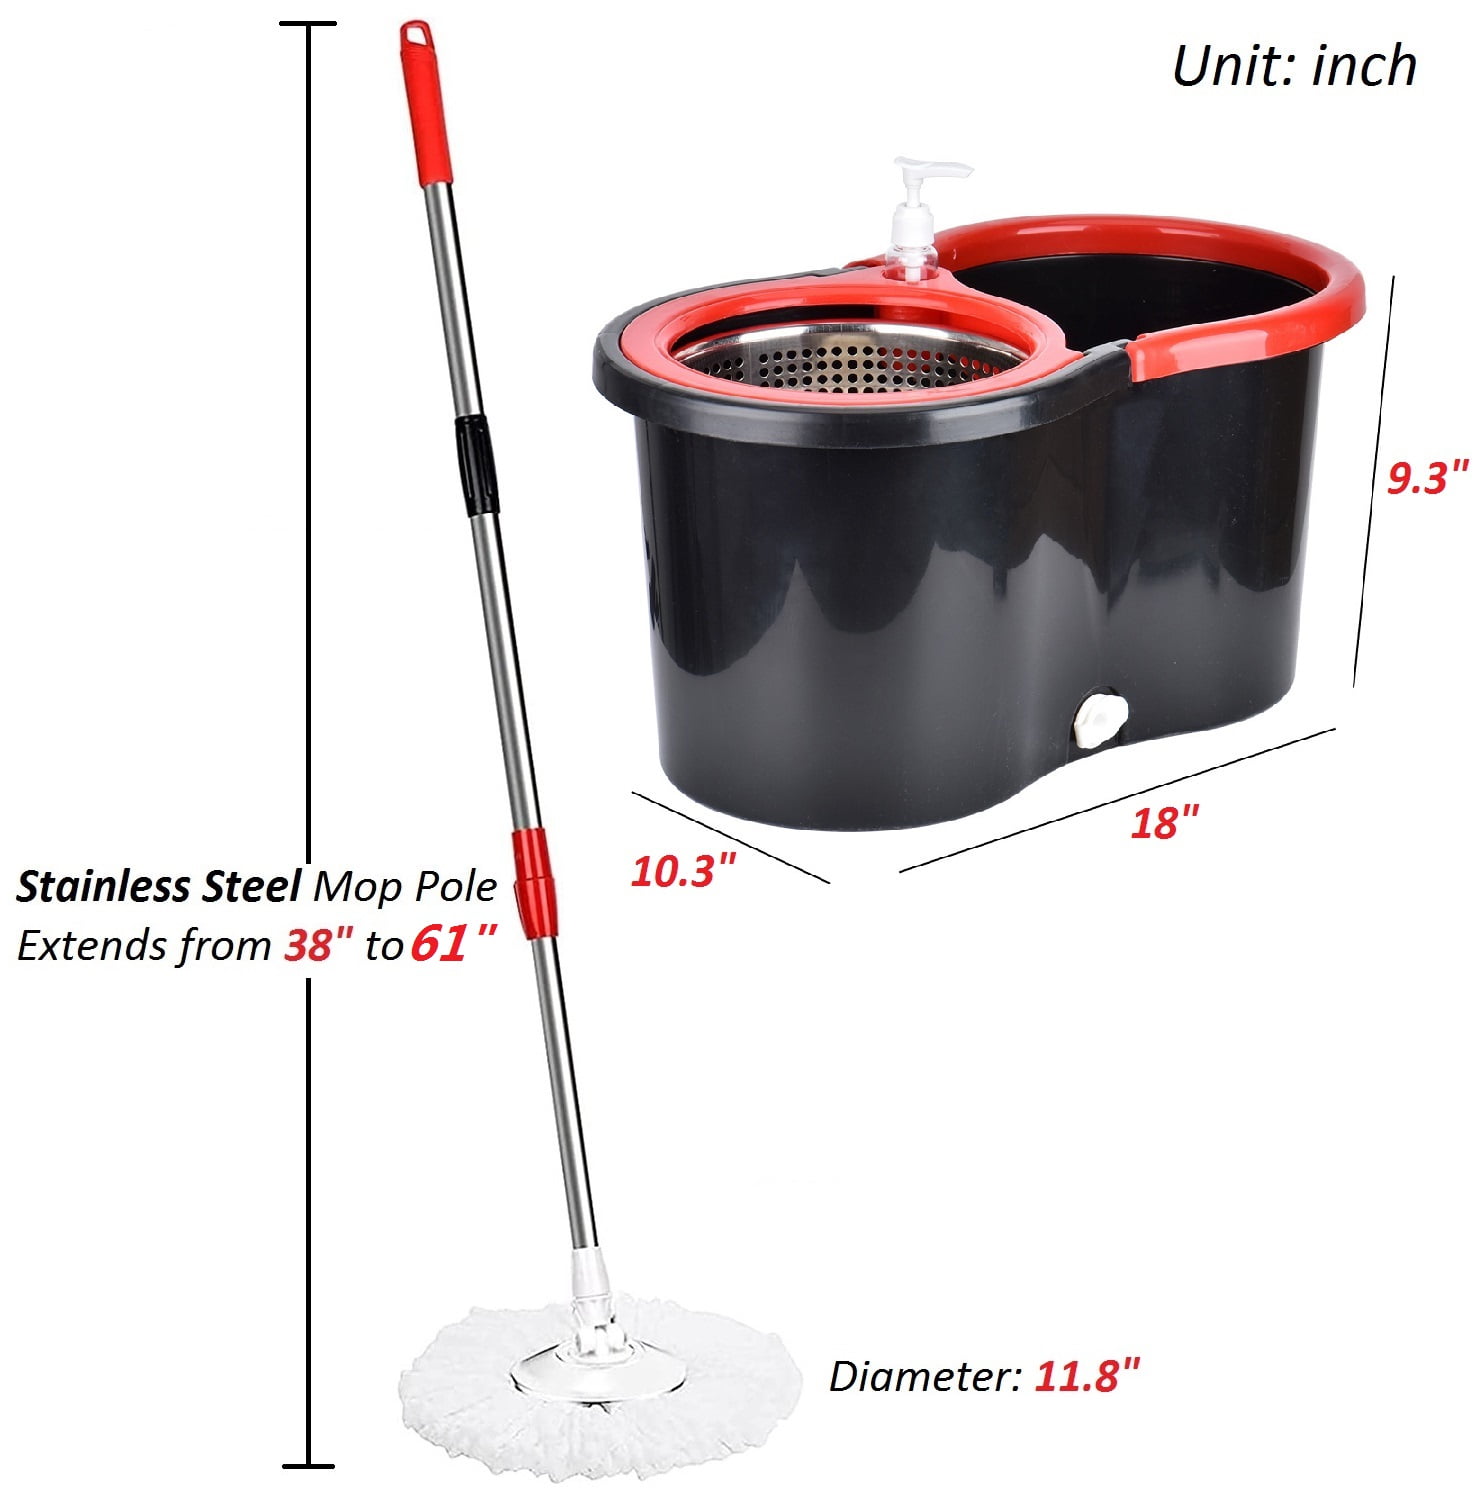 Spin Mop and Bucket with Wringer Set, 360° Rotating Head Mop Bucket System,  3 Microfiber Mop Heads for Floor Cleaning (Black & Red)